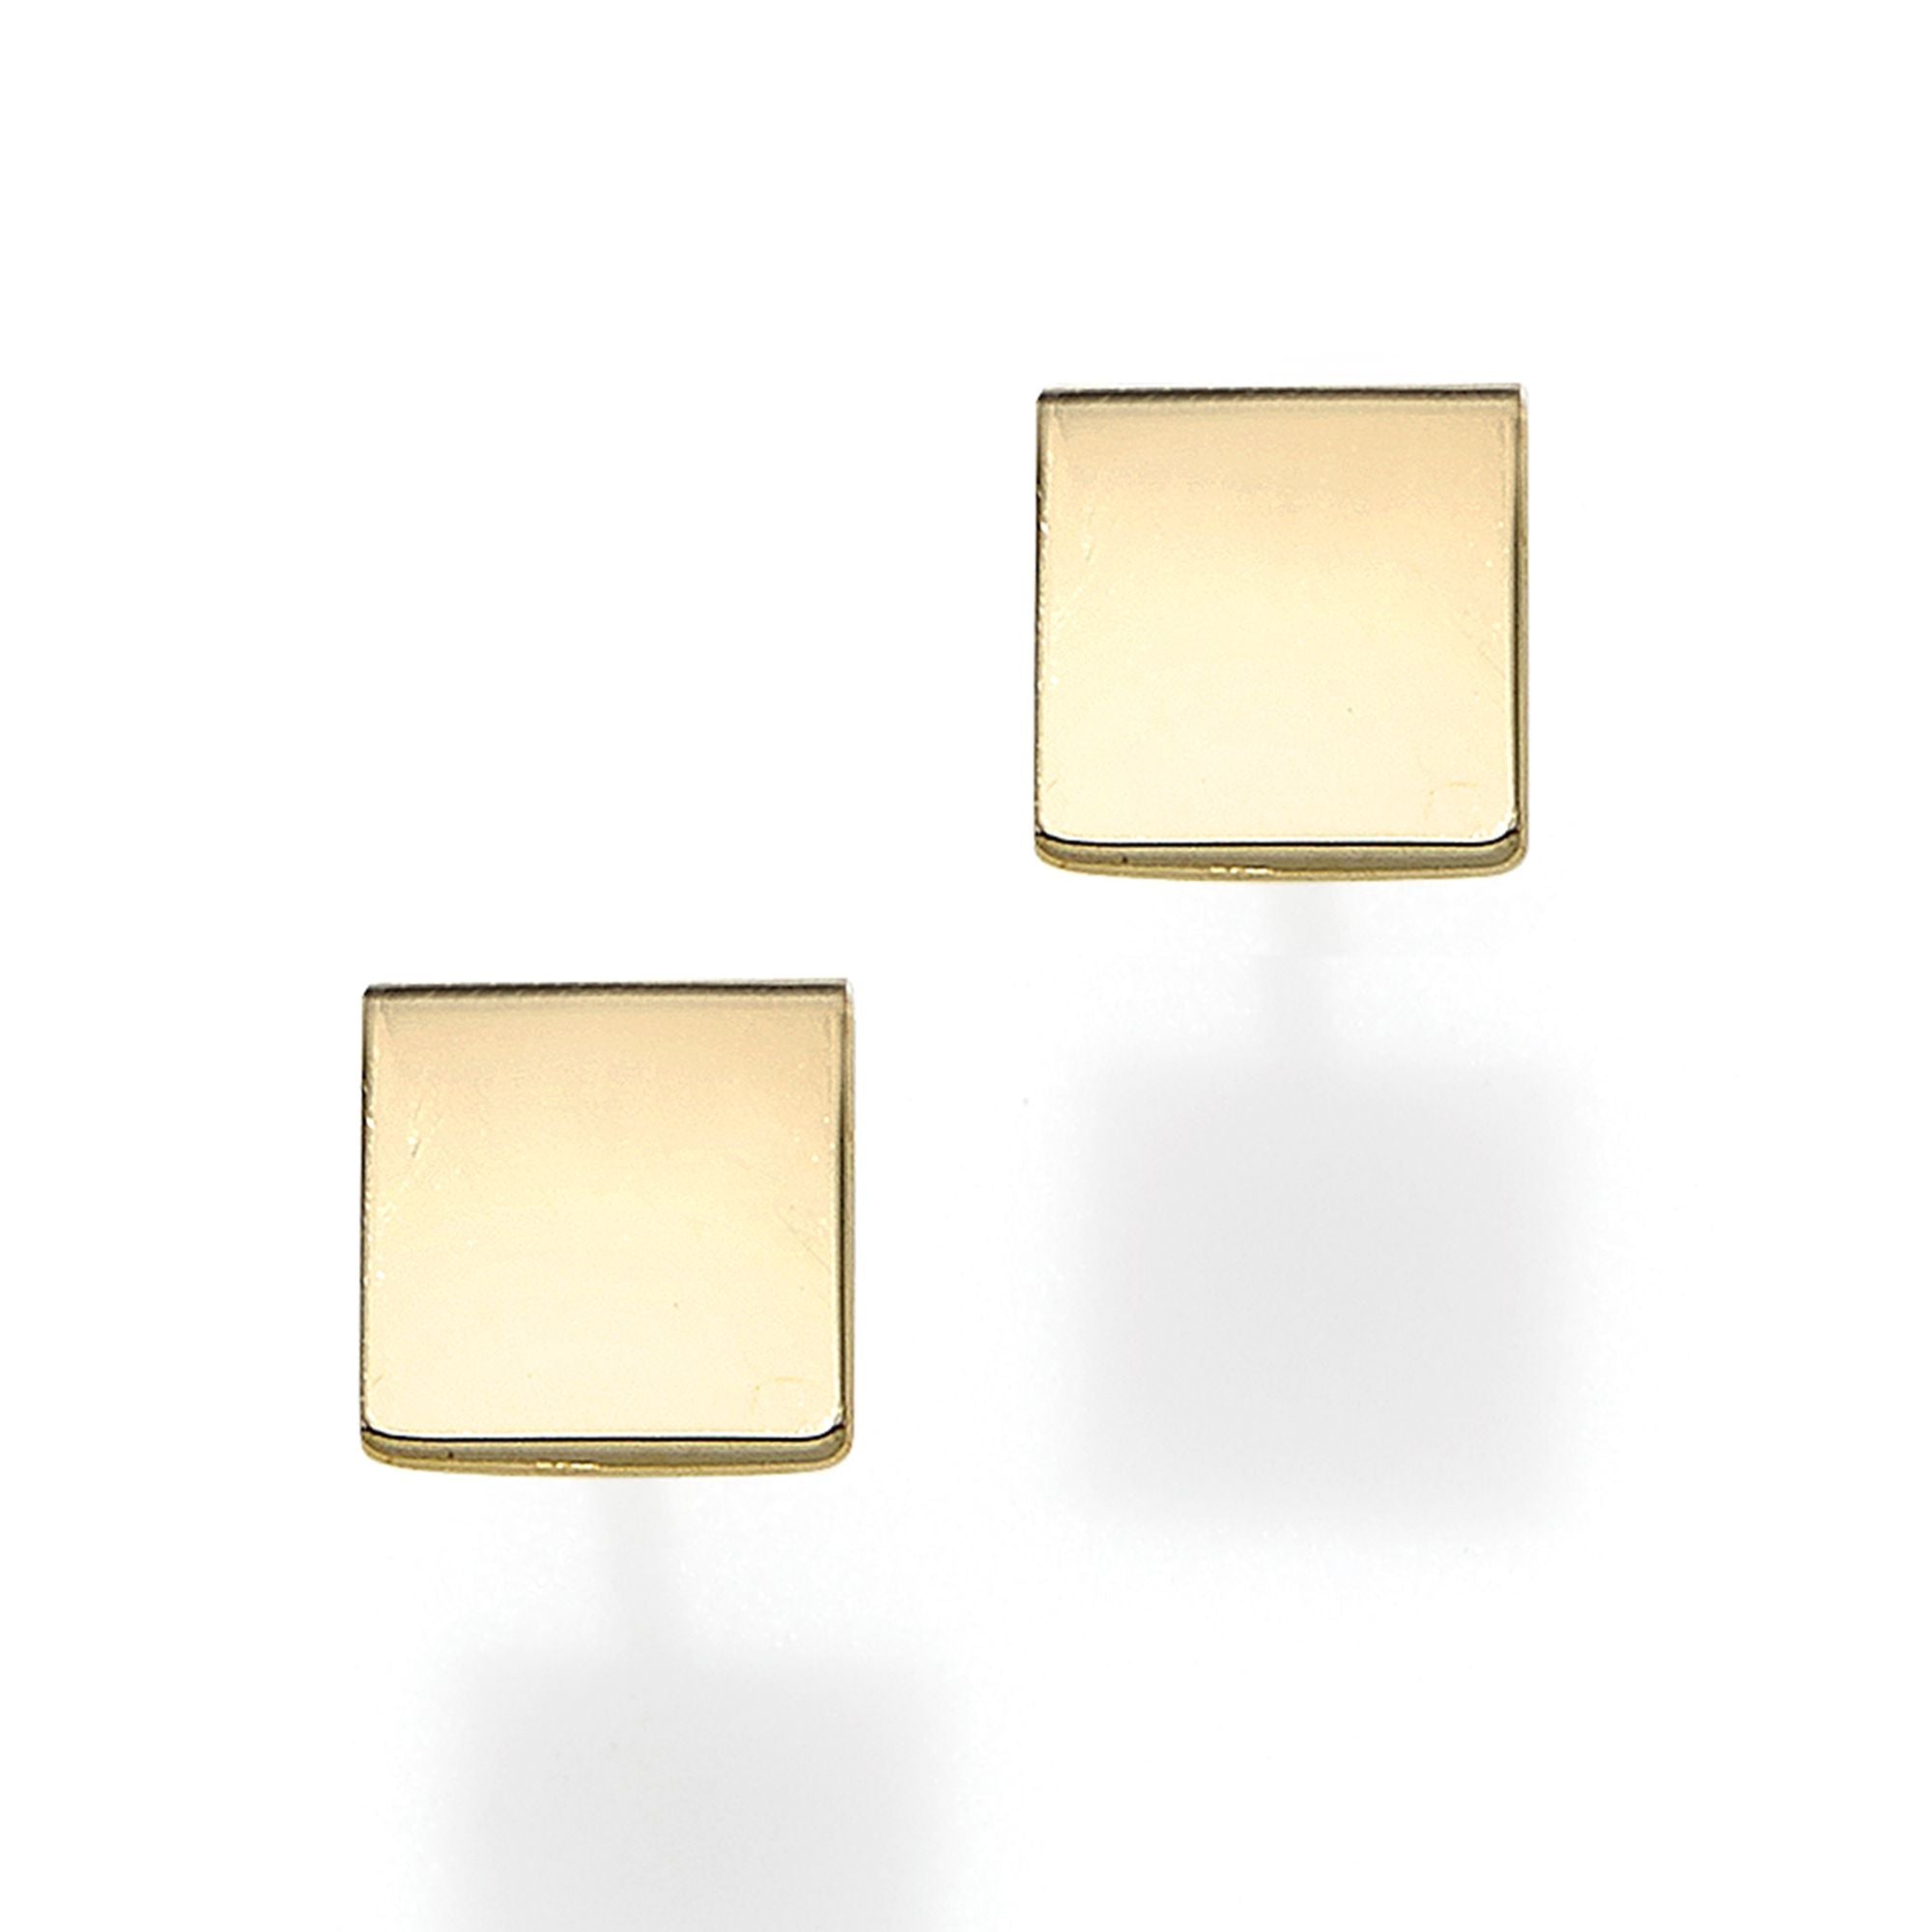 Minimalist Solid Gold Polished Geometric Square Post Earrings with Push Back Clasp - wingroupjewelry